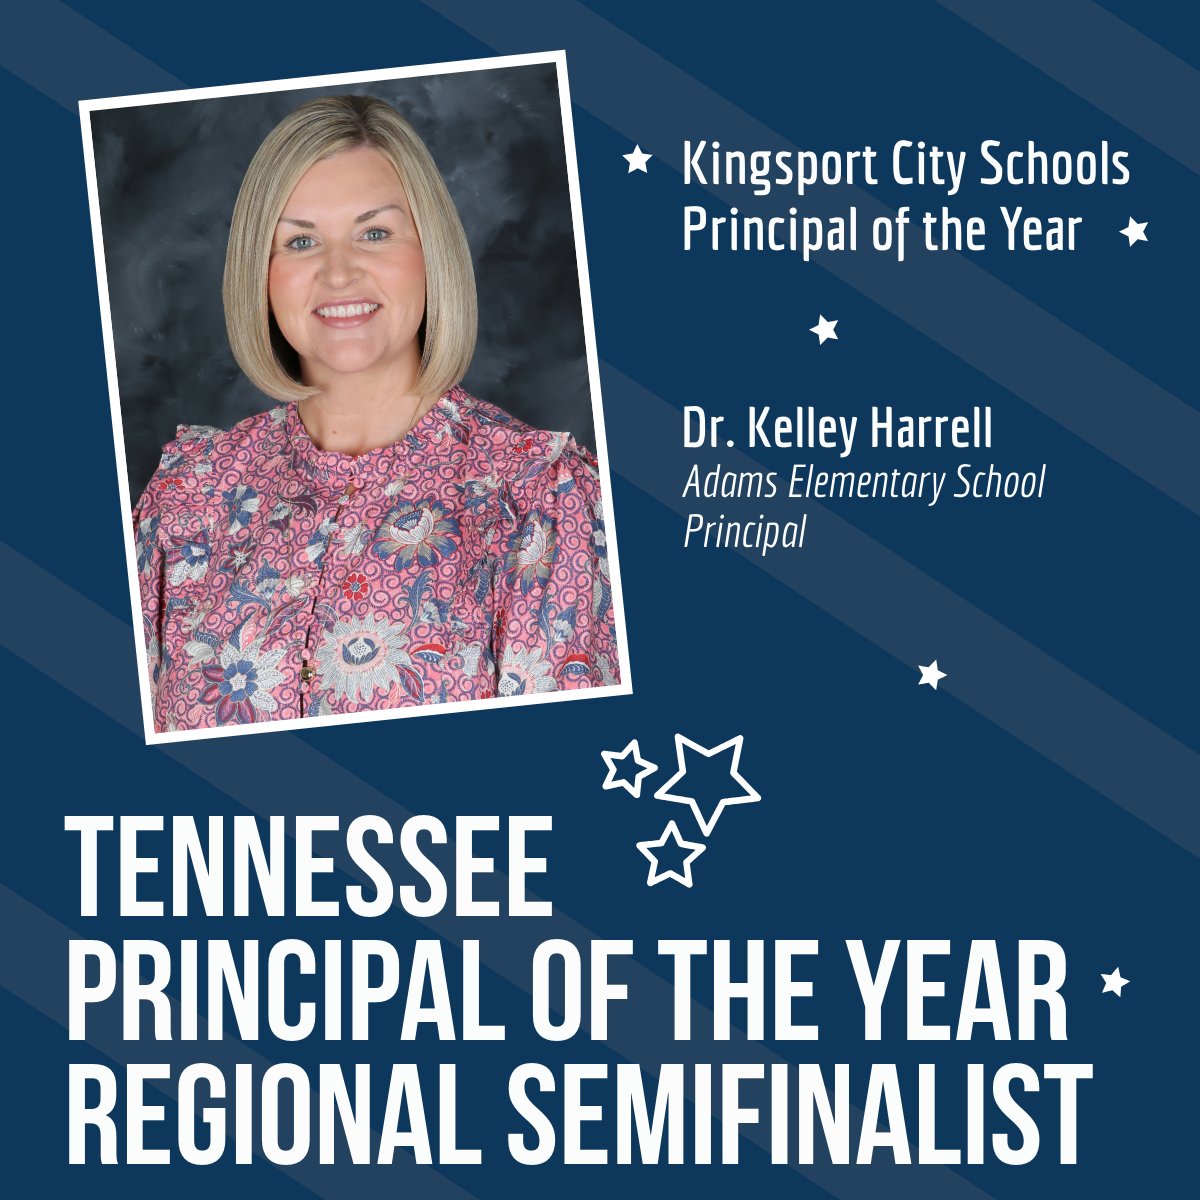 ⭐CONGRATS⭐ to @KCS_Adams Principal Dr. Kelley Harrell on advancing to the Regional Semifinalist Round of the 2024-25 TN Principal of the Year competition!😀